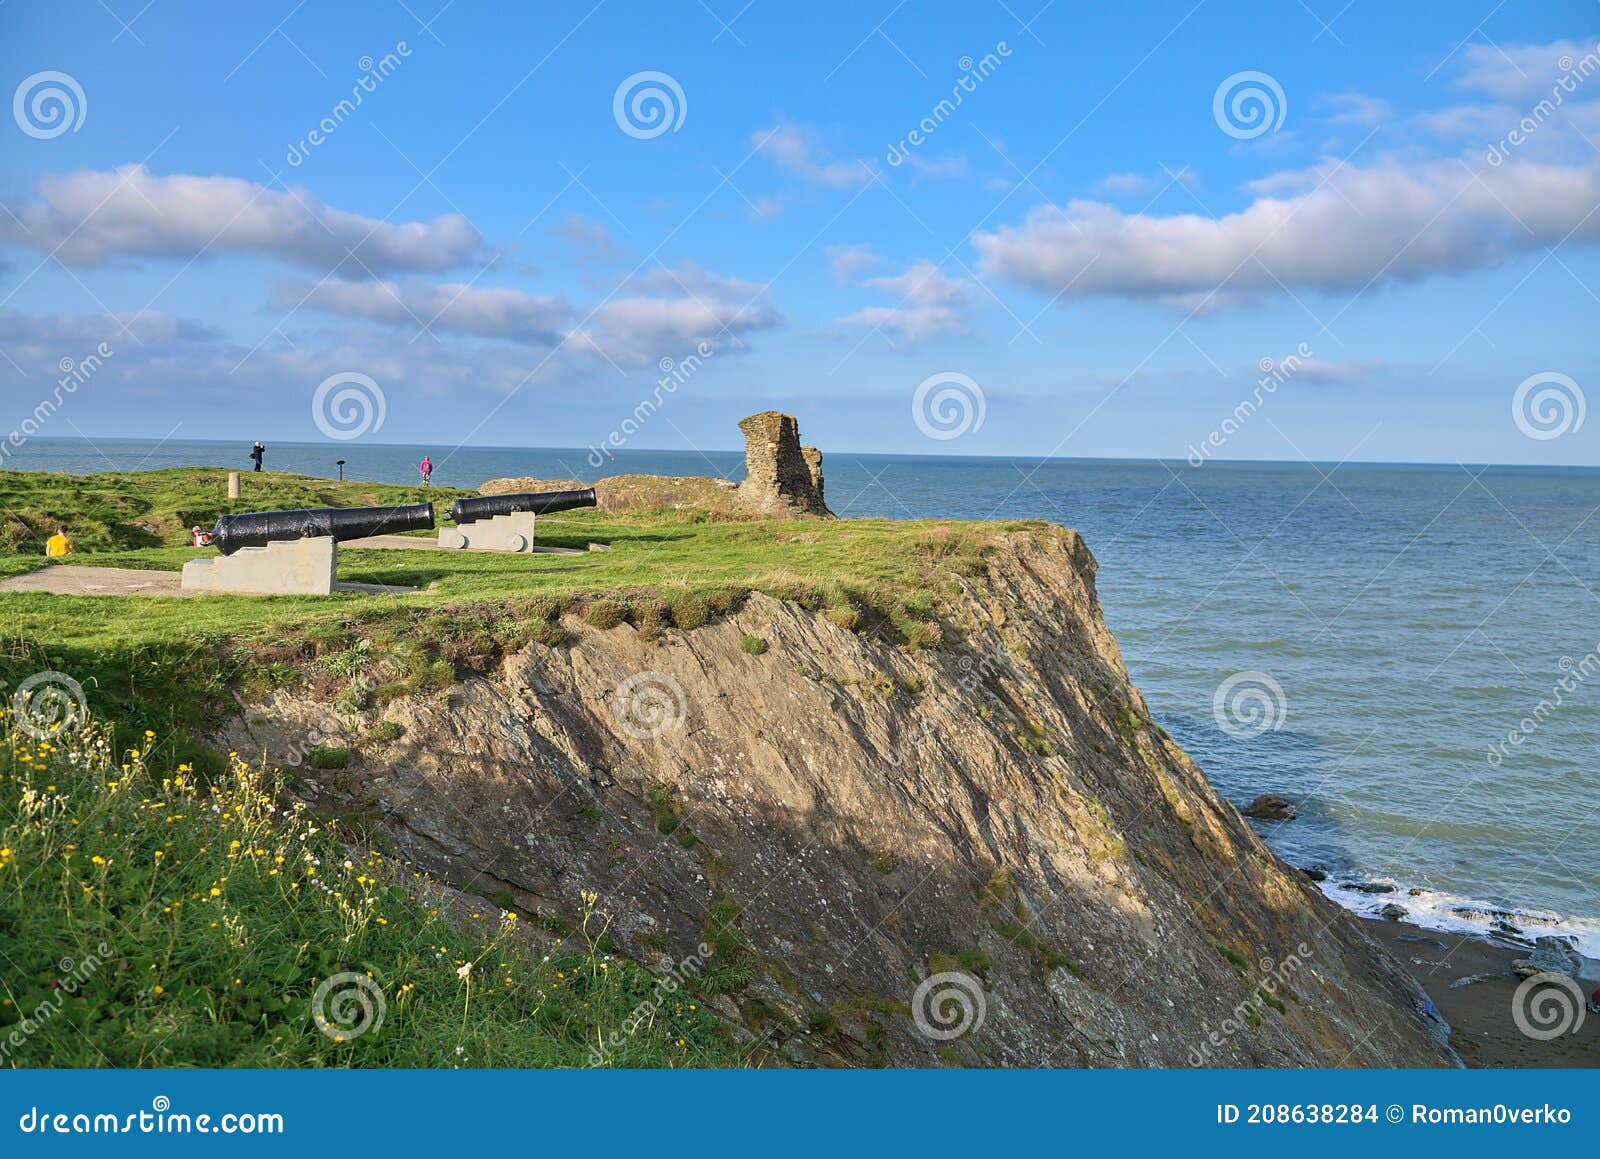 stunning view of cliffy seascape  old black cannons  yellow flowers  and black castle ruins  south quay  corporation lands